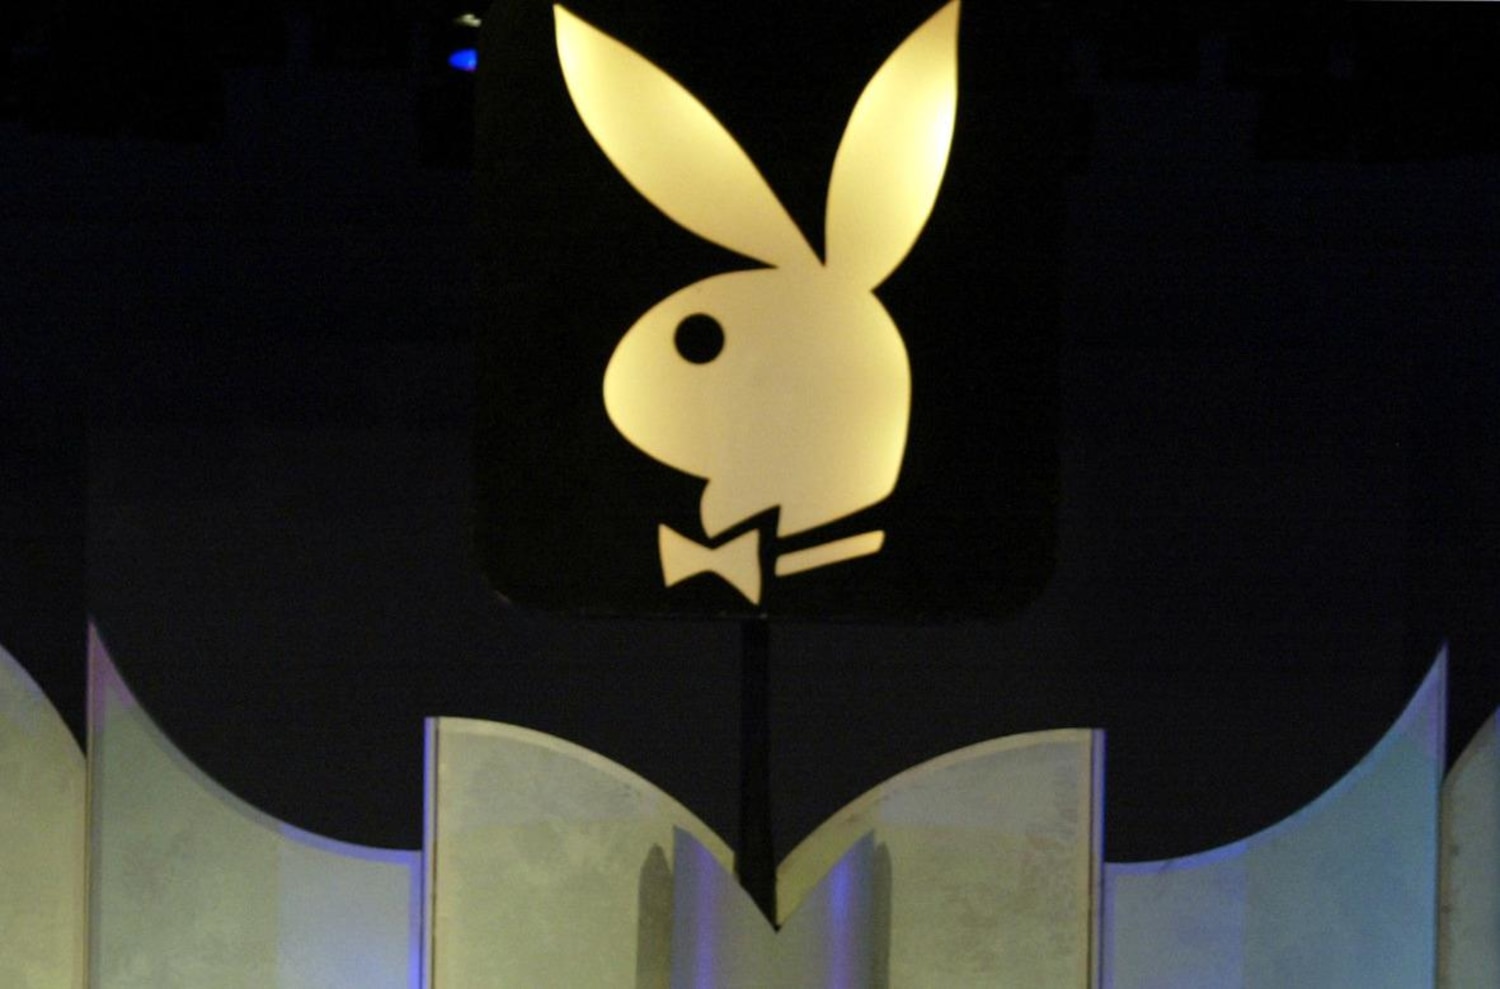 Free Bare Nudist - Bare Trap: Can Playboy Reposition Itself and Remain Relevant?